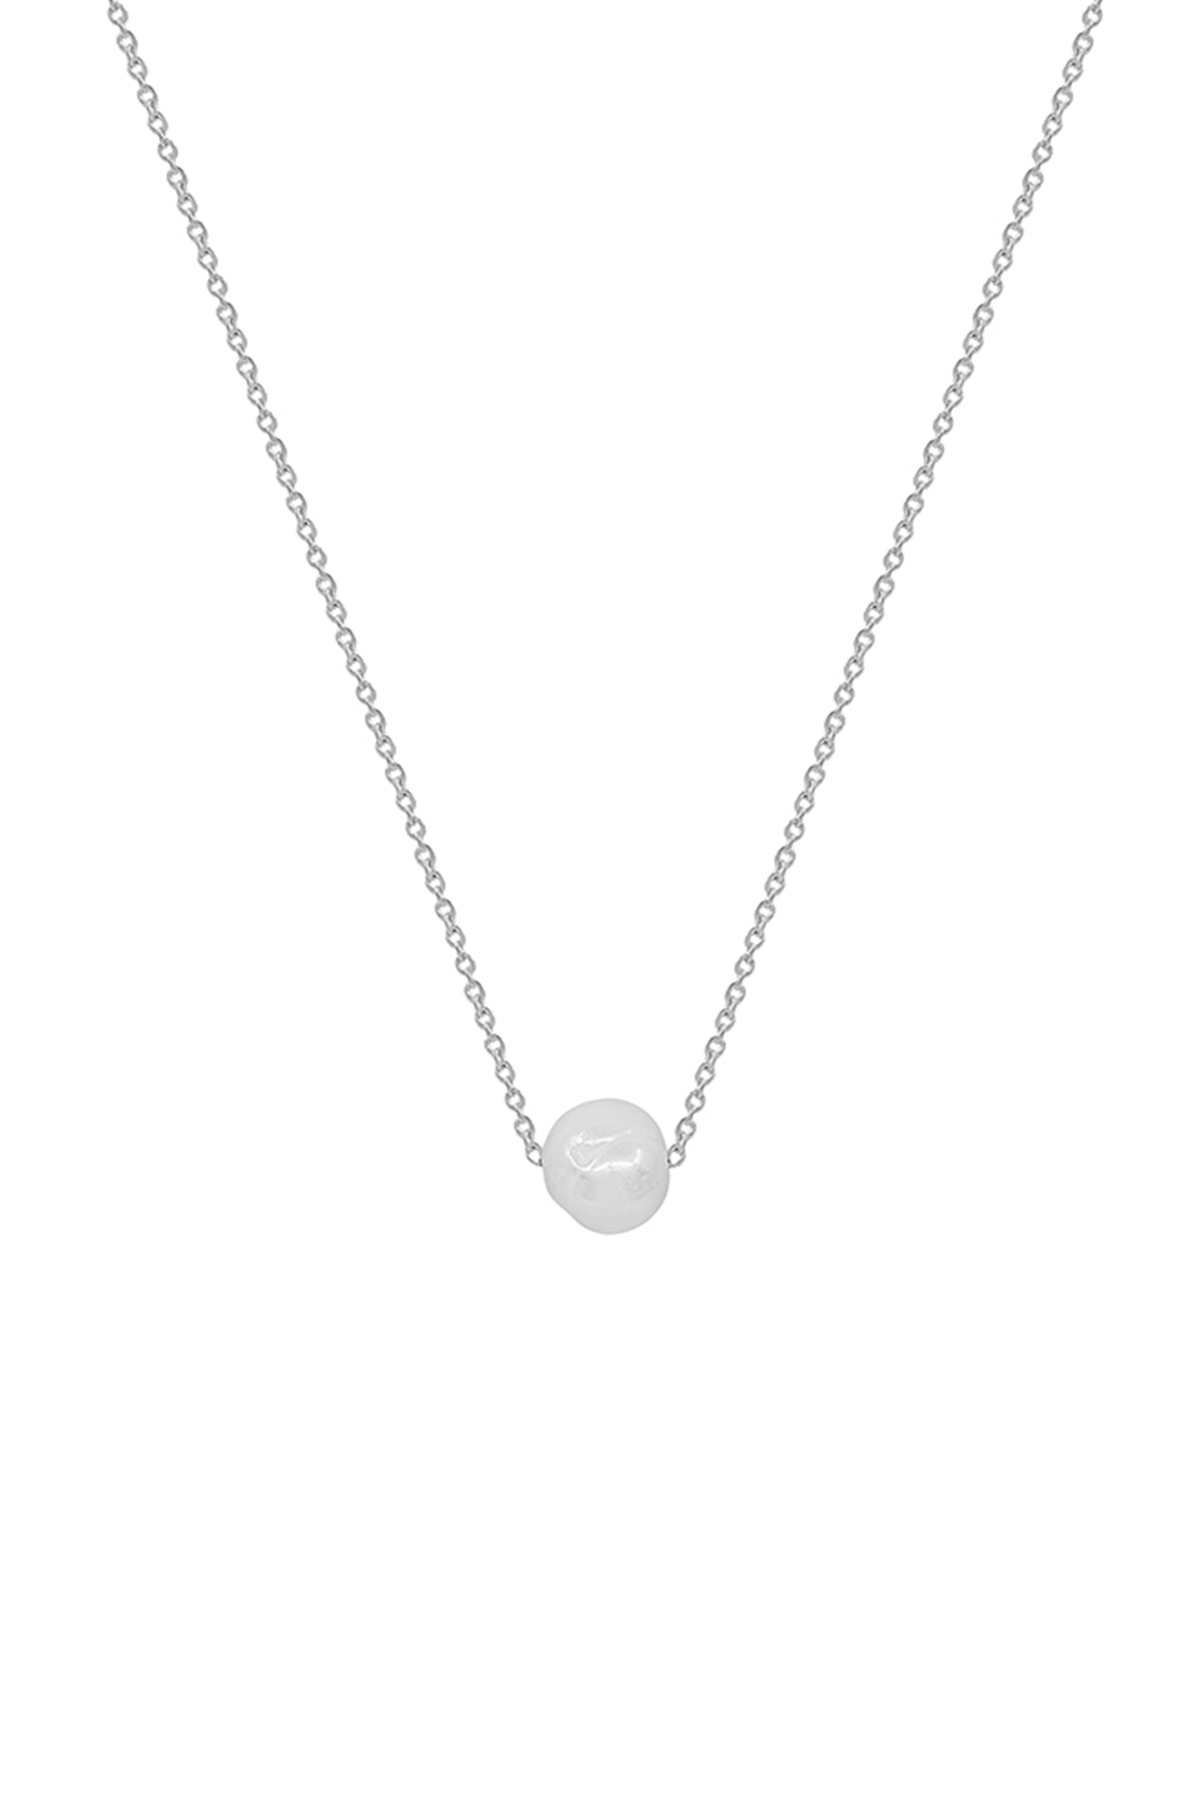 10MM FRESHWATER PEARL CHAIN THRU NECKLACE